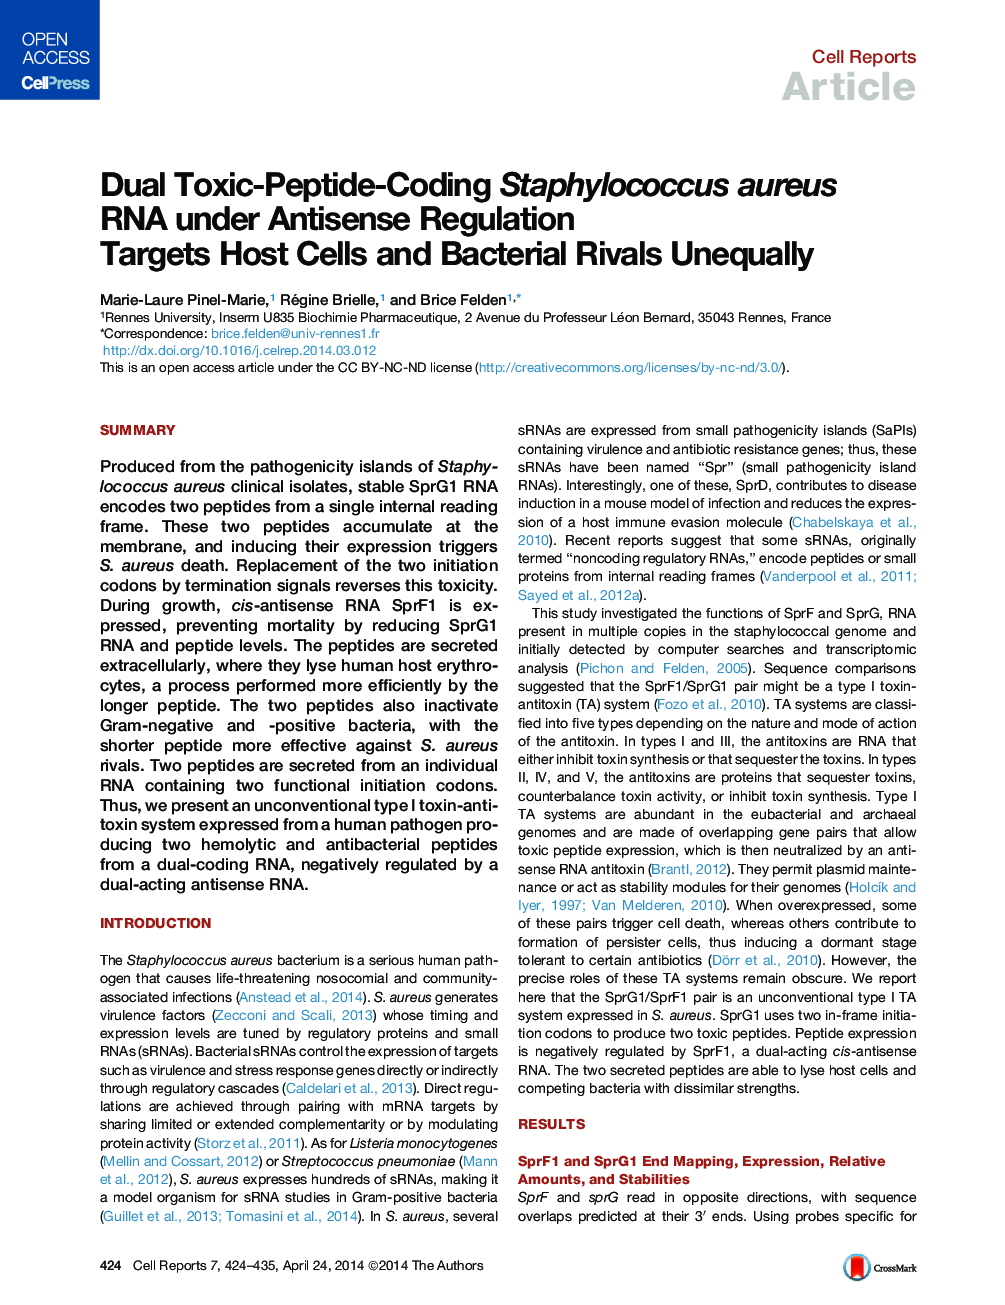 Dual Toxic-Peptide-Coding Staphylococcus aureus RNA under Antisense Regulation Targets Host Cells and Bacterial Rivals Unequally 